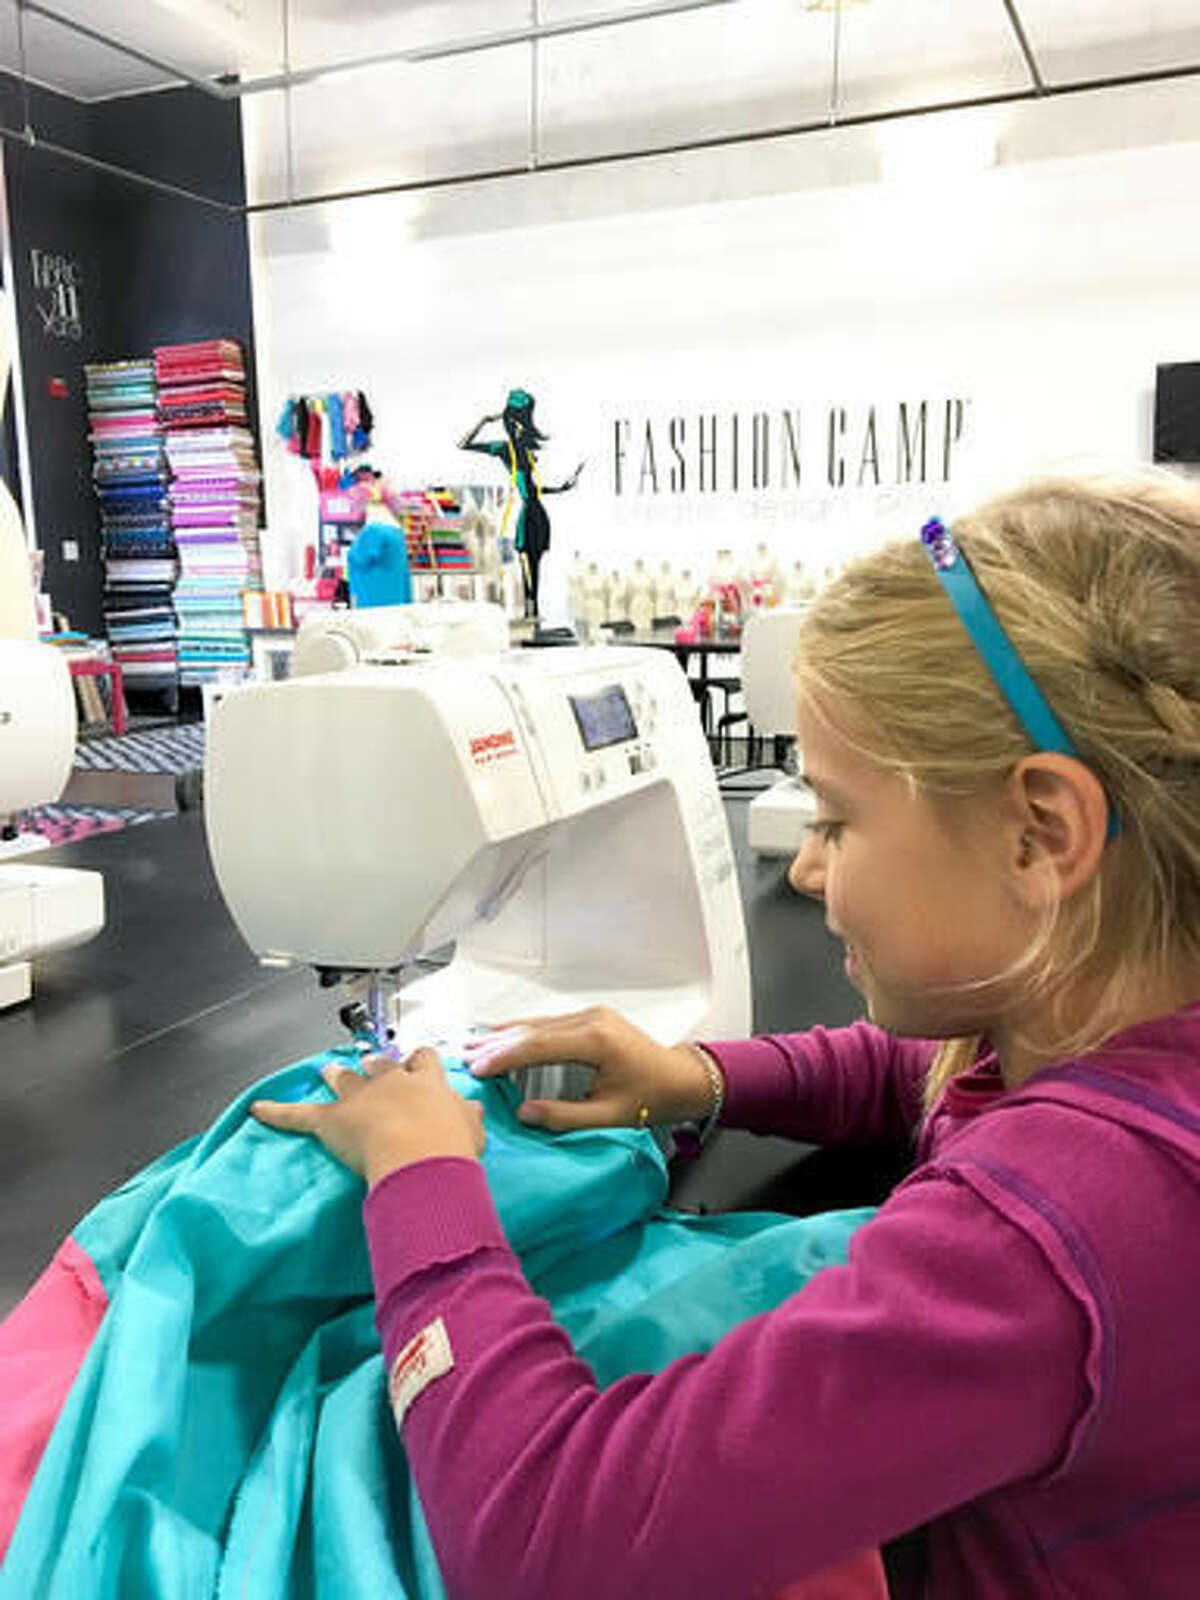 This photo provided by Fashion Camp - Create. Design. Sew., shows a young sewer going through the steps of designing, measuring and sewing her own creation at Fashion Camp - Create. Design. Sew. in Tuscon, Calif. Roughly 800 kids are attending camp this summer. (Fashion Camp - Create. Design. Sew. via AP)